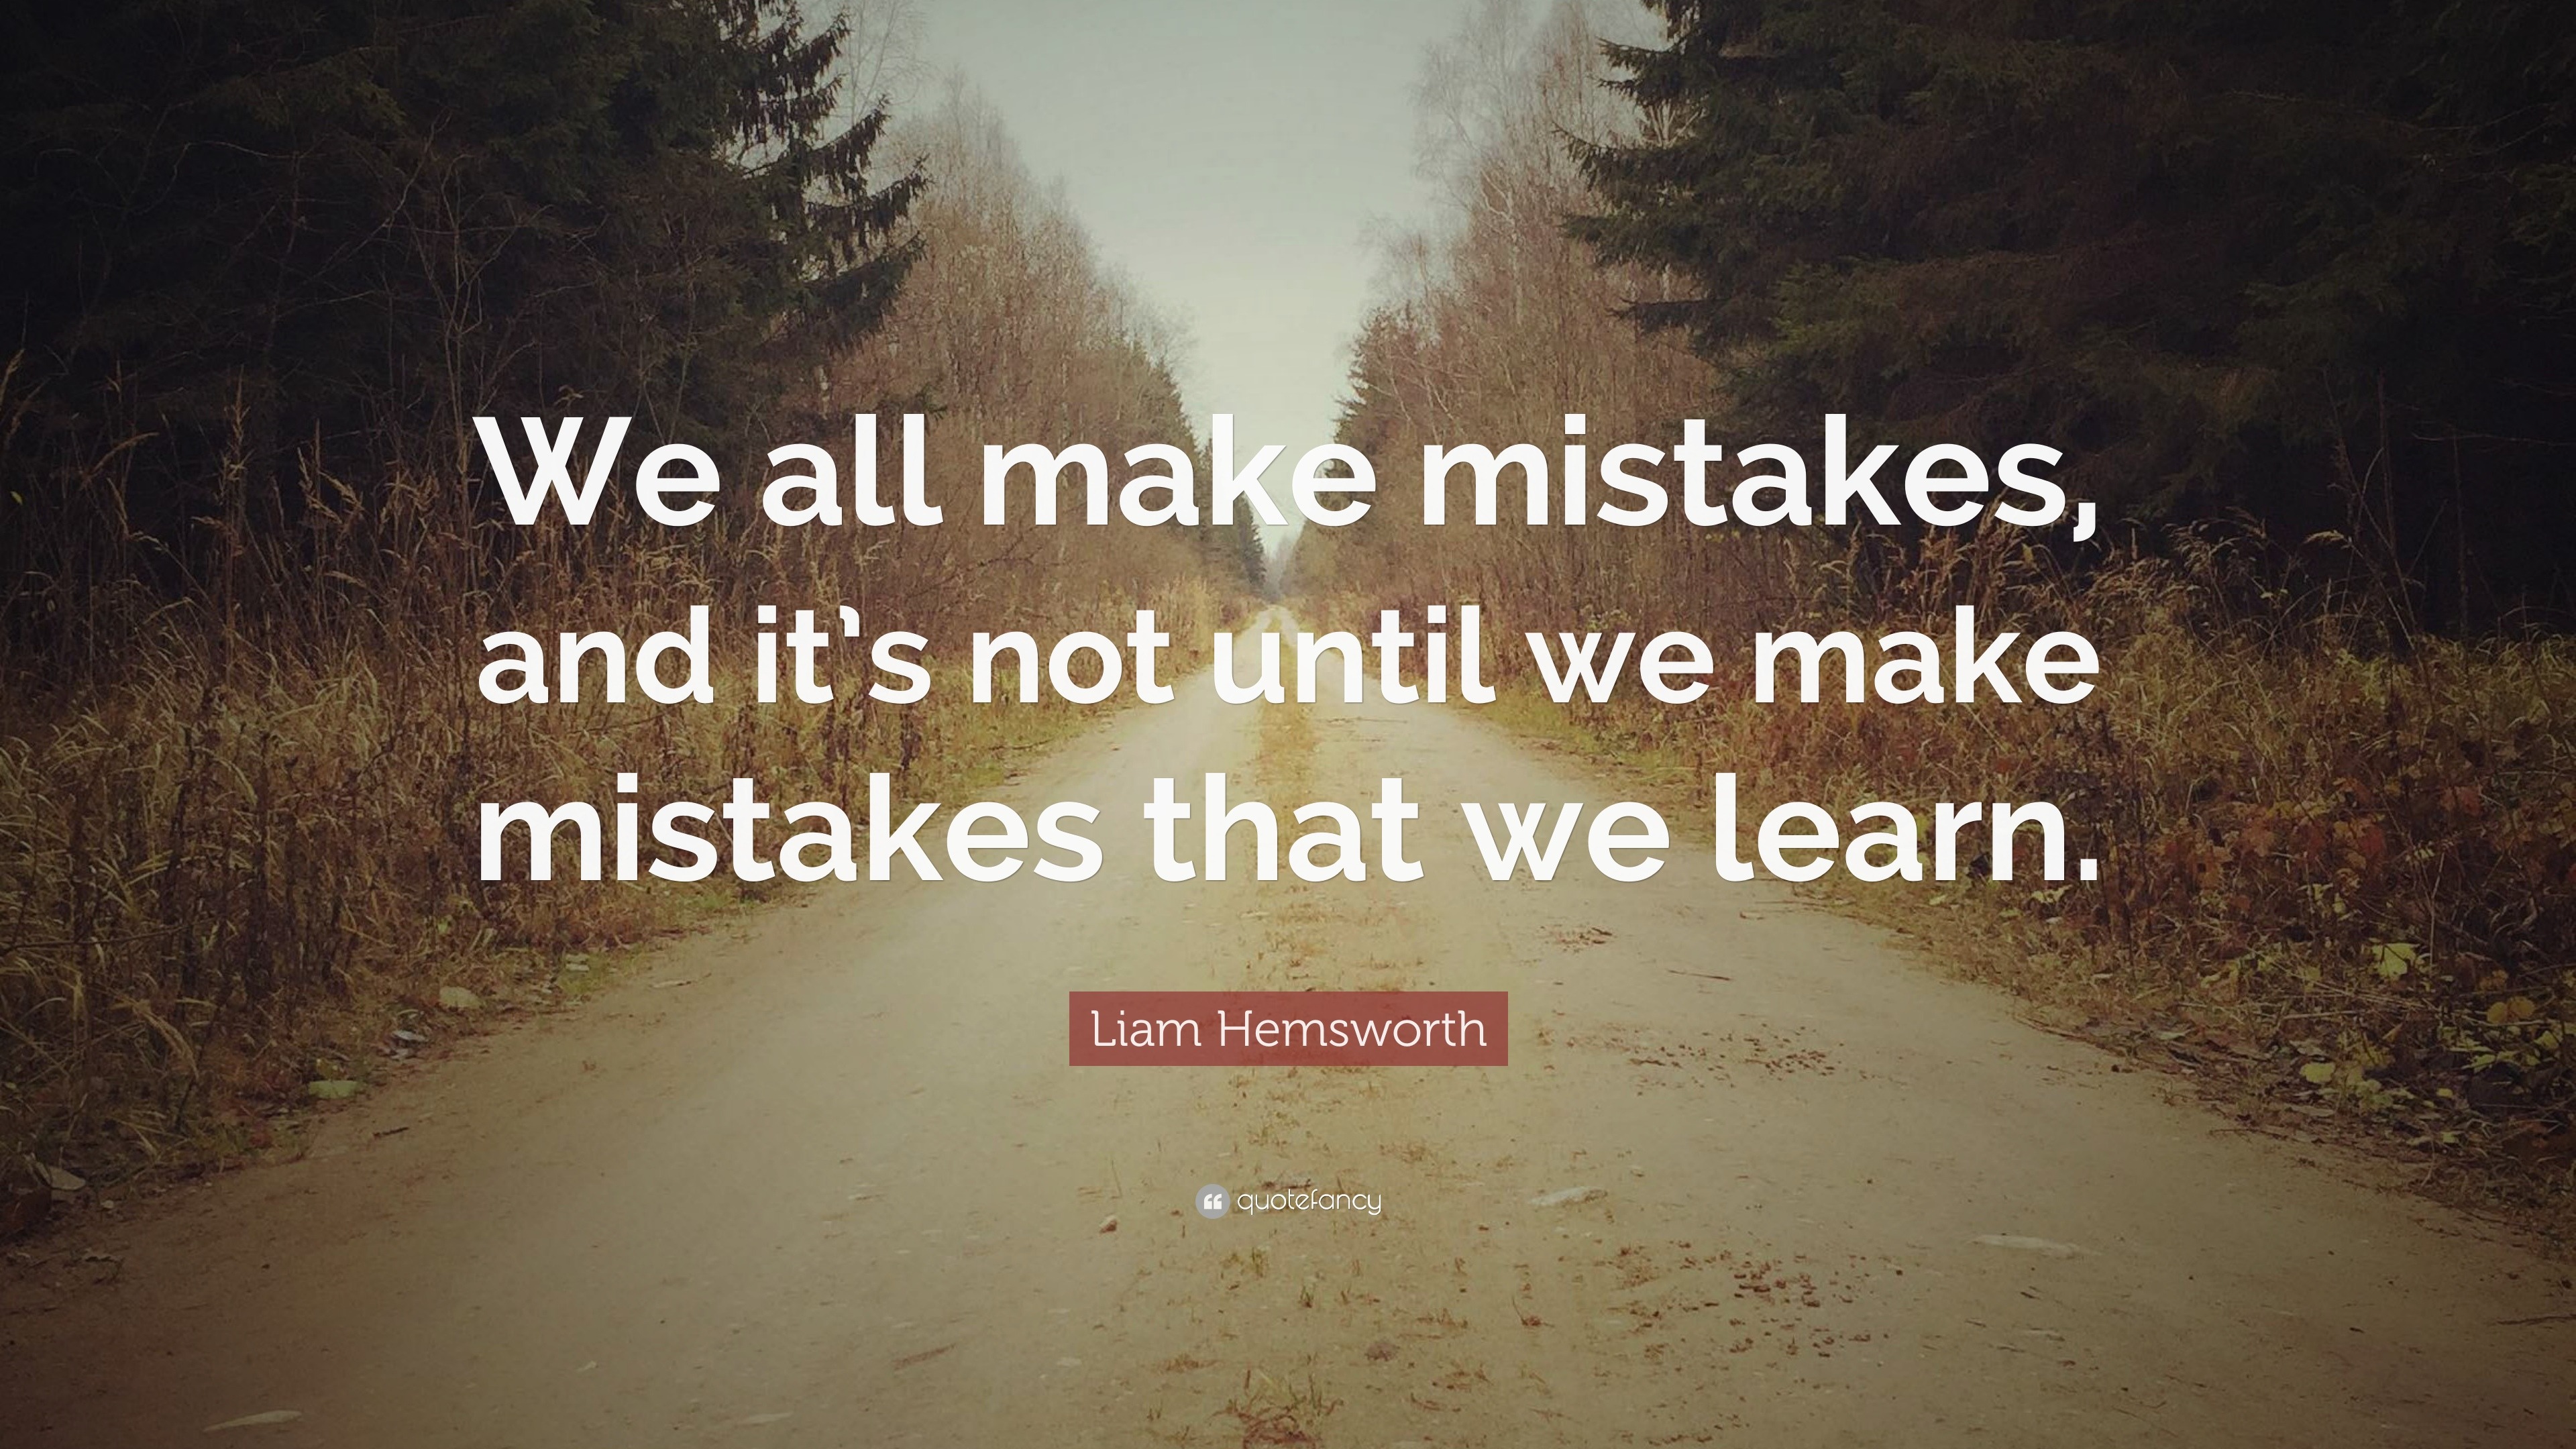 Liam Hemsworth Quote: “We all make mistakes, and it’s not until we make